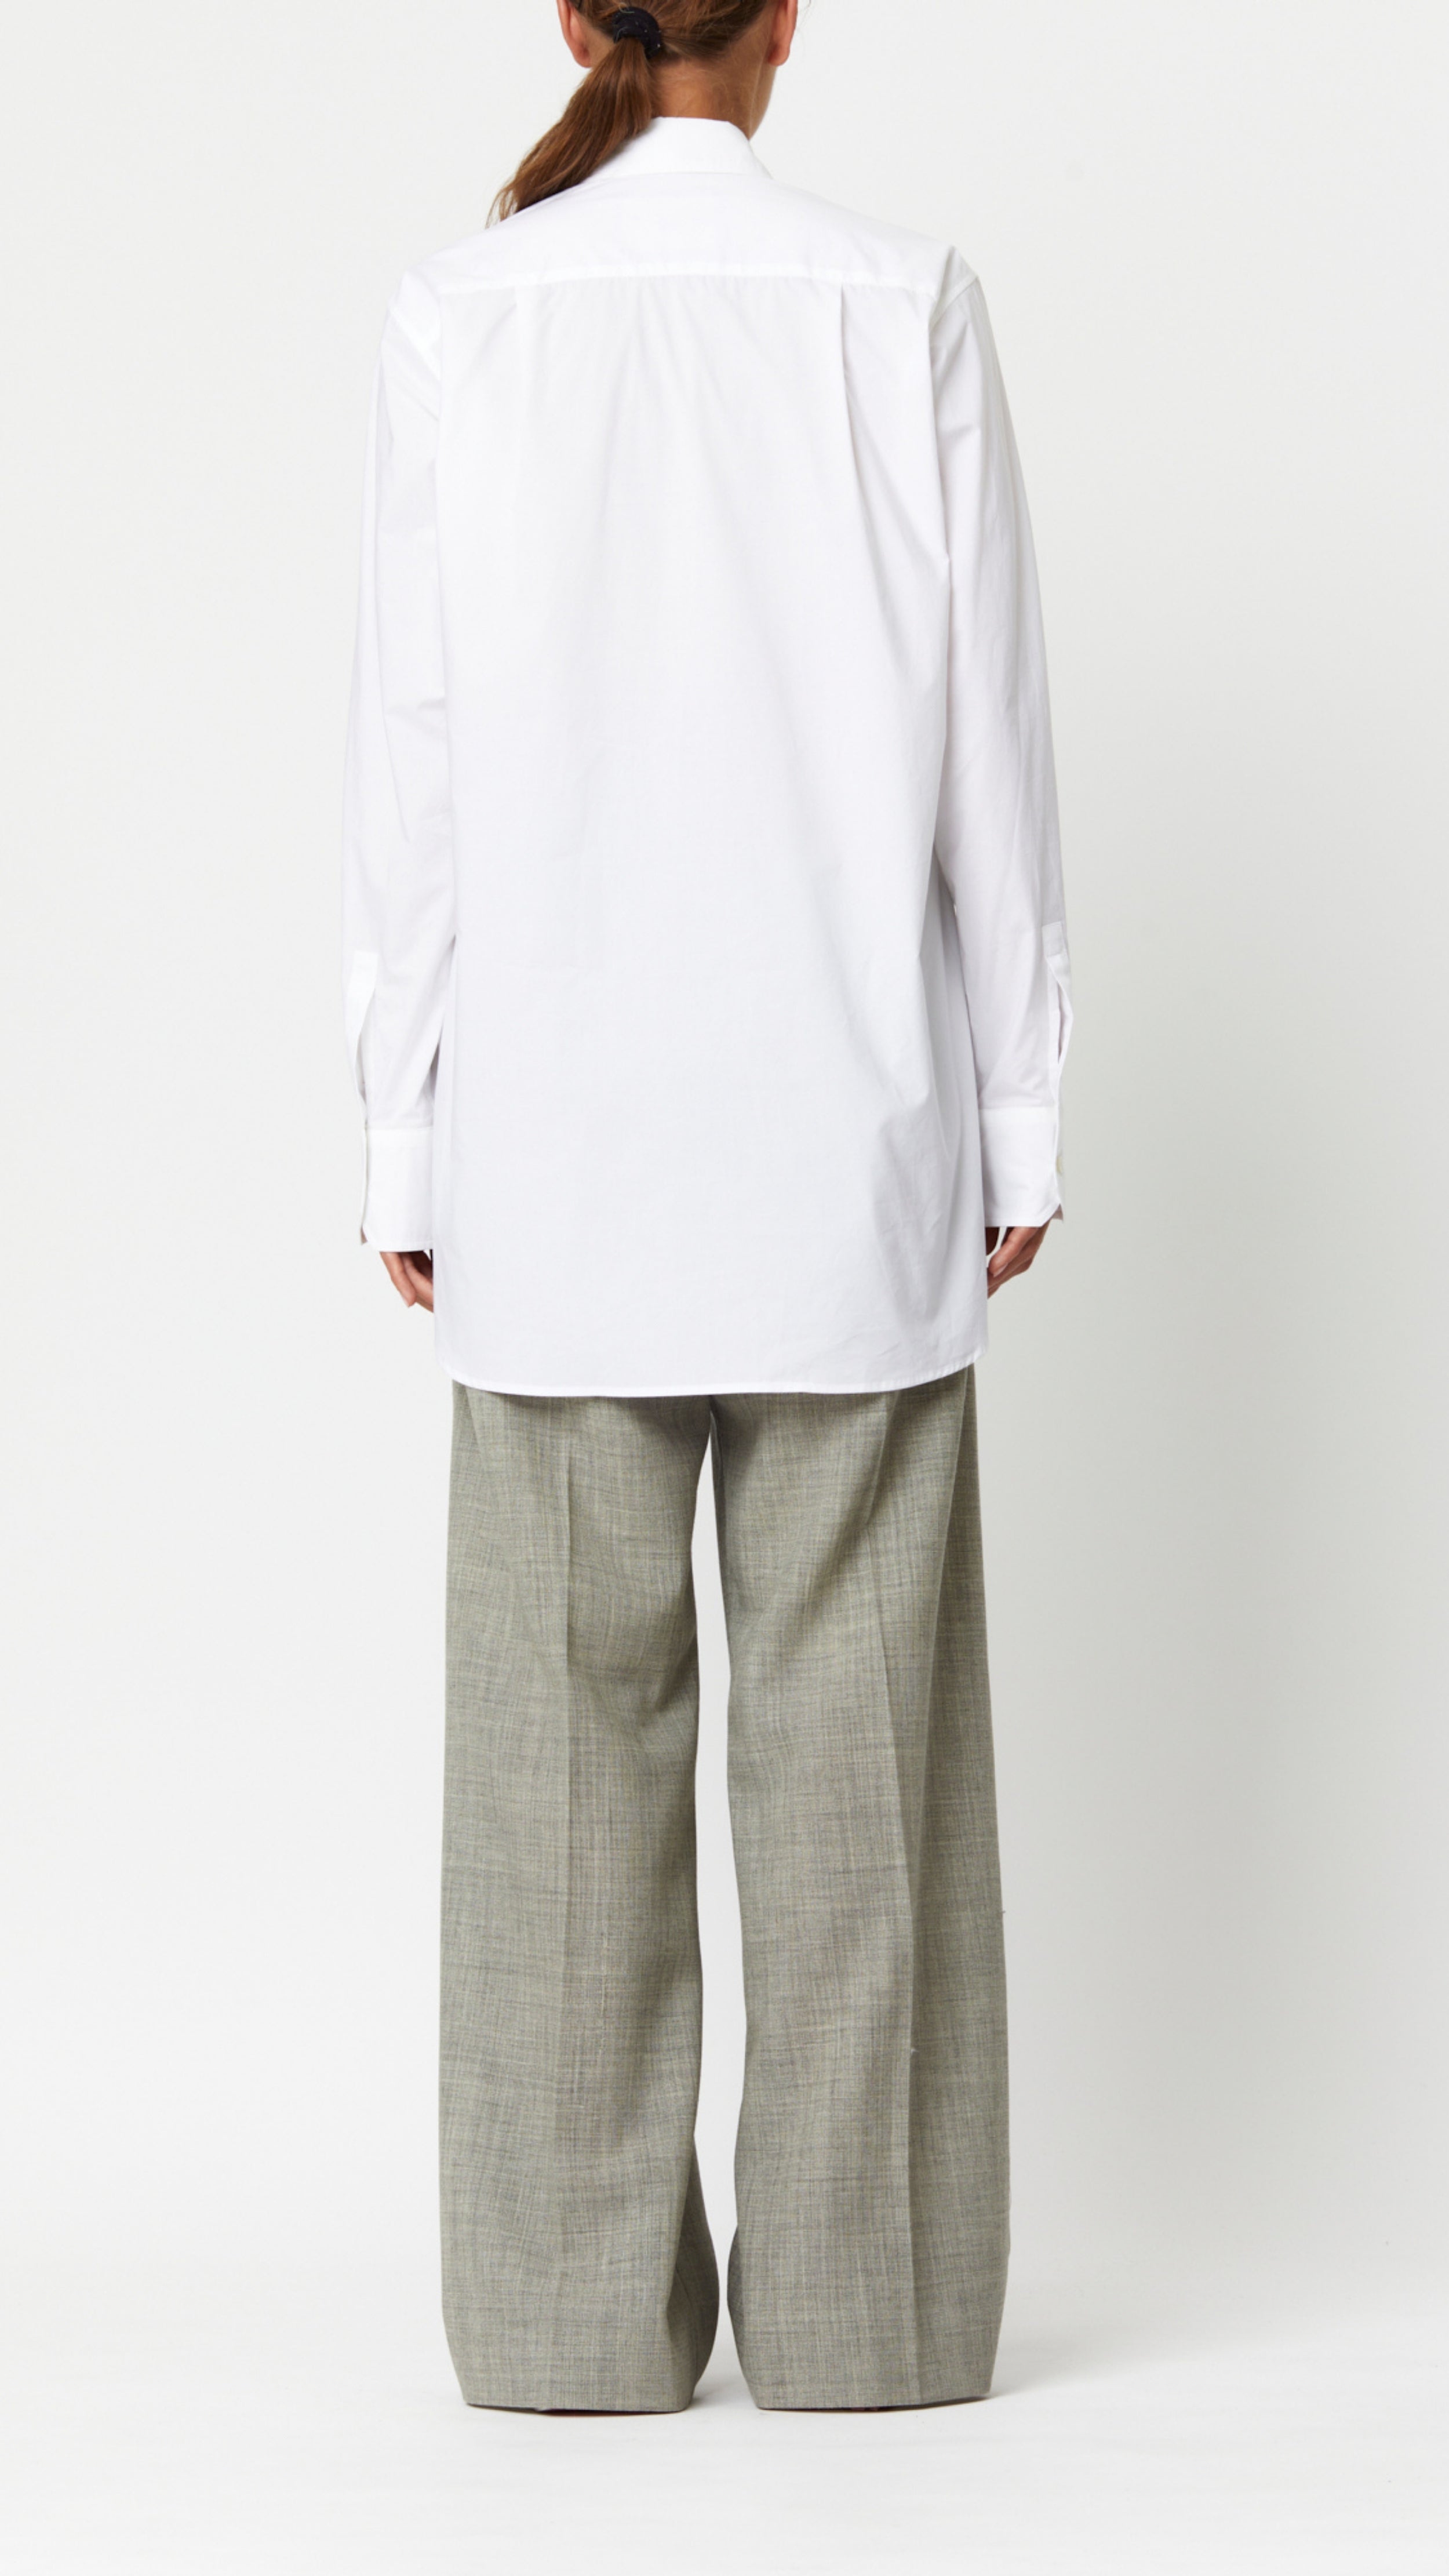 Plan C Cotton Poplin Tuxedo Shirt 100% cotton tuxedo style blouse with a pleated shoulder, long sleeves, and cuffs. Slightly oversize men&#39;s style fit. Shown on model facing back.